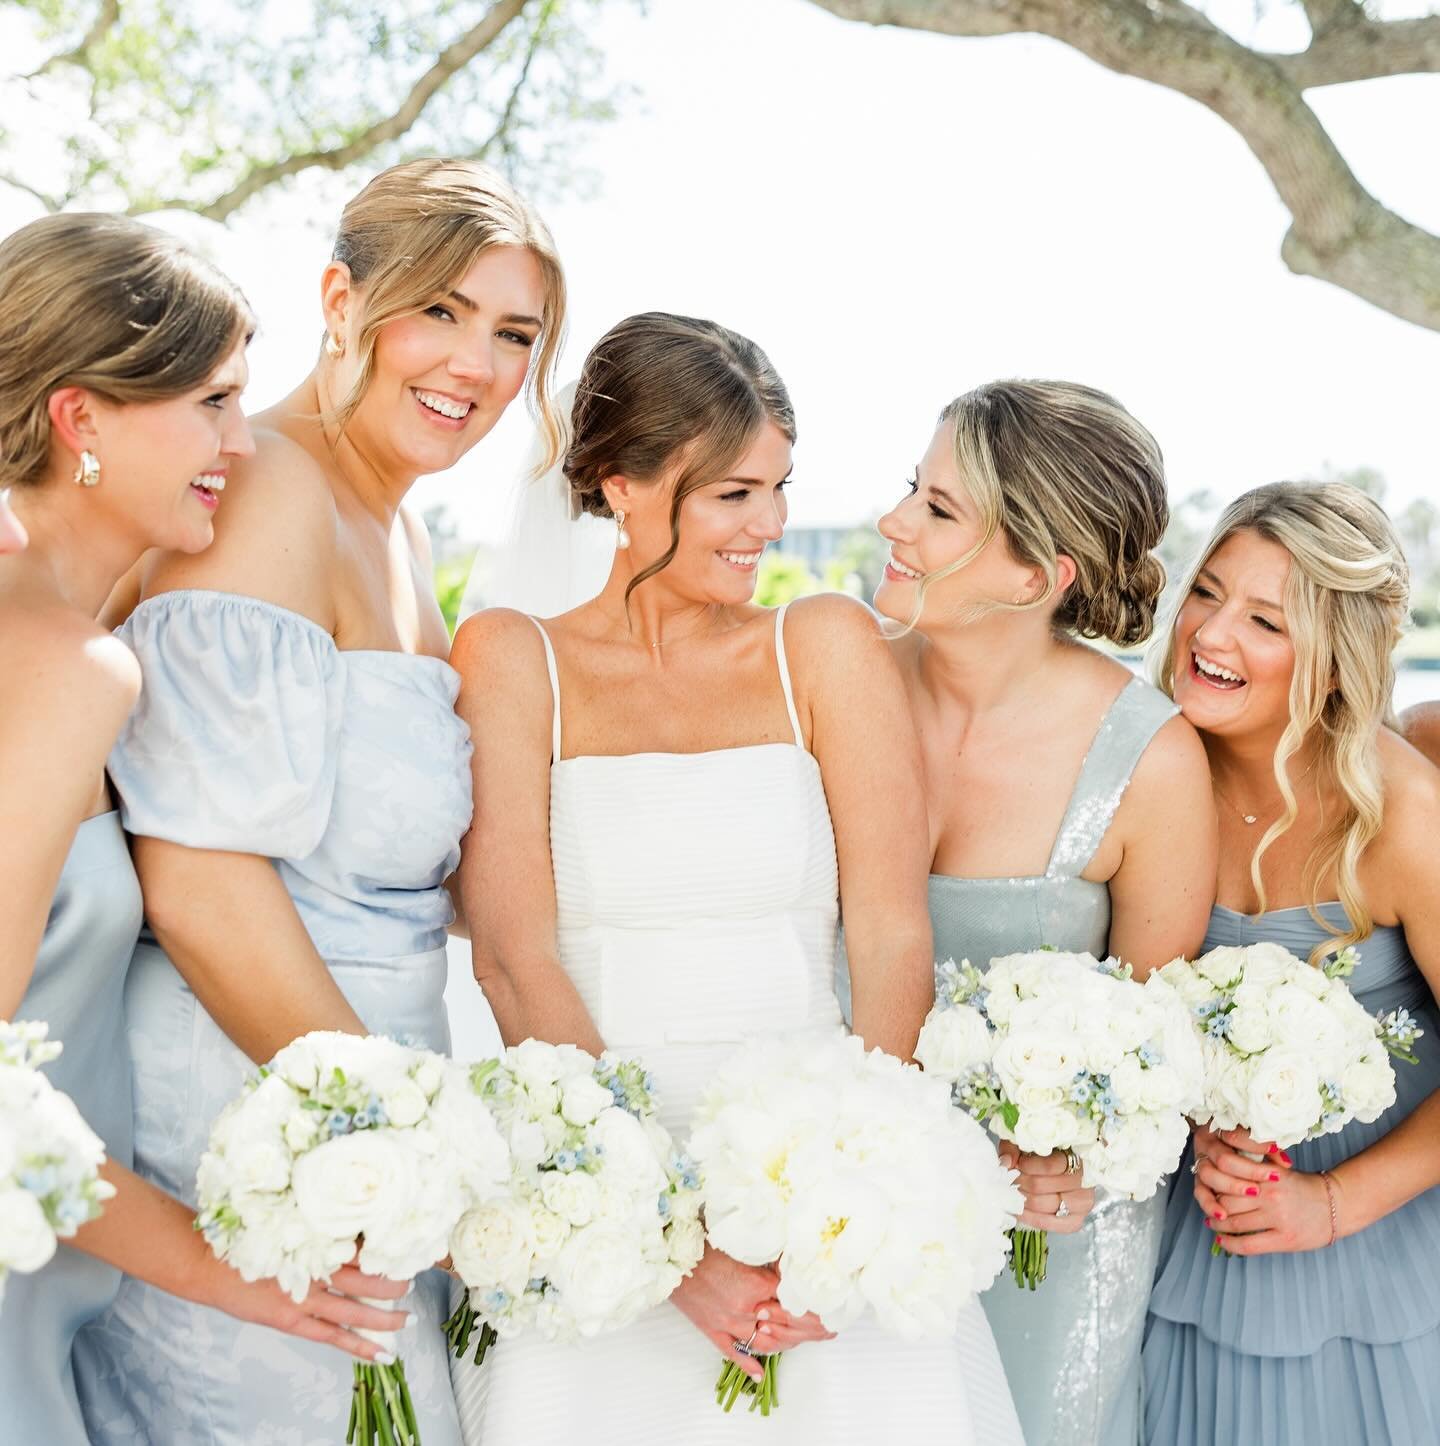 That bridal party GLOW, though✨ Haley and her crew had jaws dropping left and right👏 

Beautiful photos by @oxanaroxphotography 

#studiobride #bridalmakeup #bridalparty #bridegoals #weddingglam #brideglam #bridesmaids #bridesmaiddresses #bridesmaid